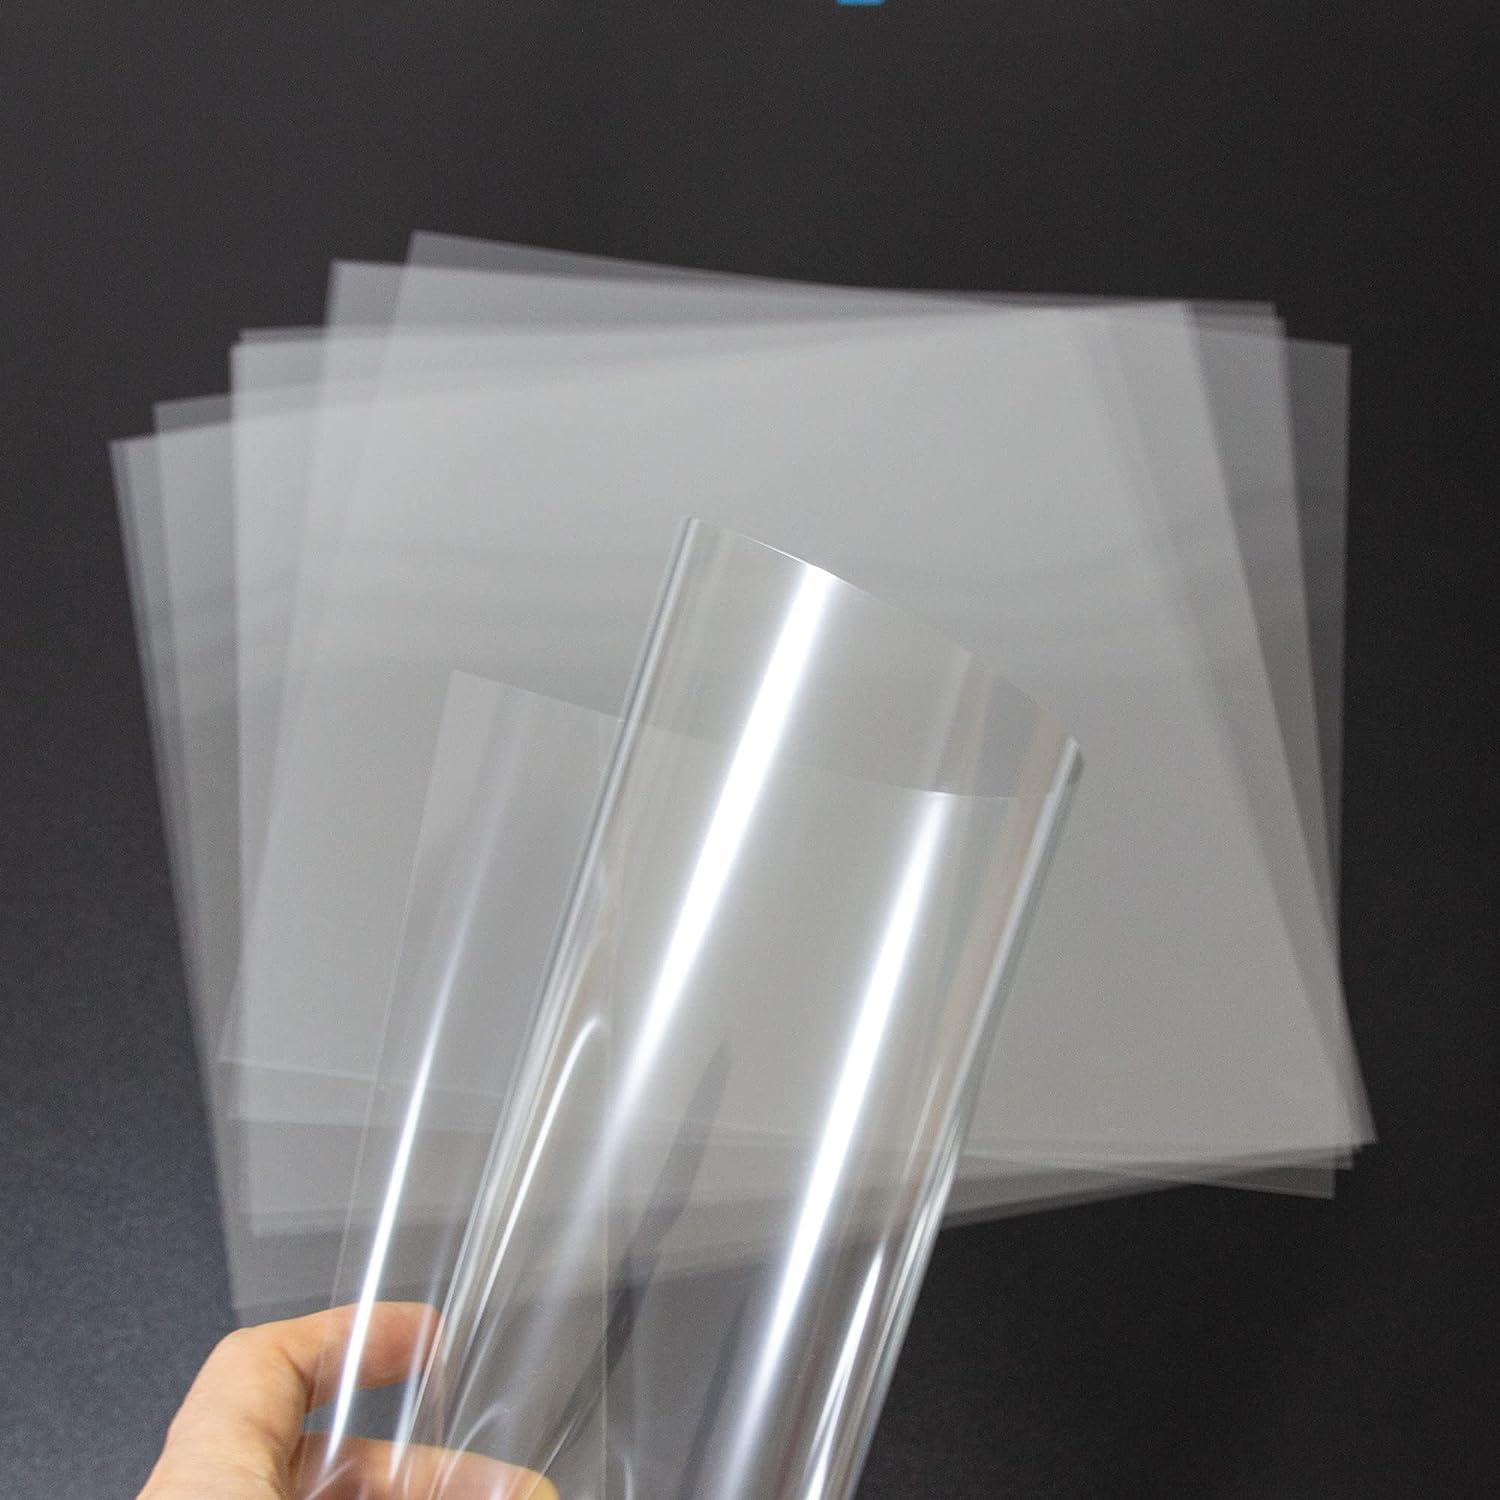 7.5 Mil Blank Mylar Stencil Sheet (10Pcs),12 x 24 inch Clear Plastic Sheets, Acetate Sheets for Crafts, Plastic Sheets for Cutting Machine, Pet